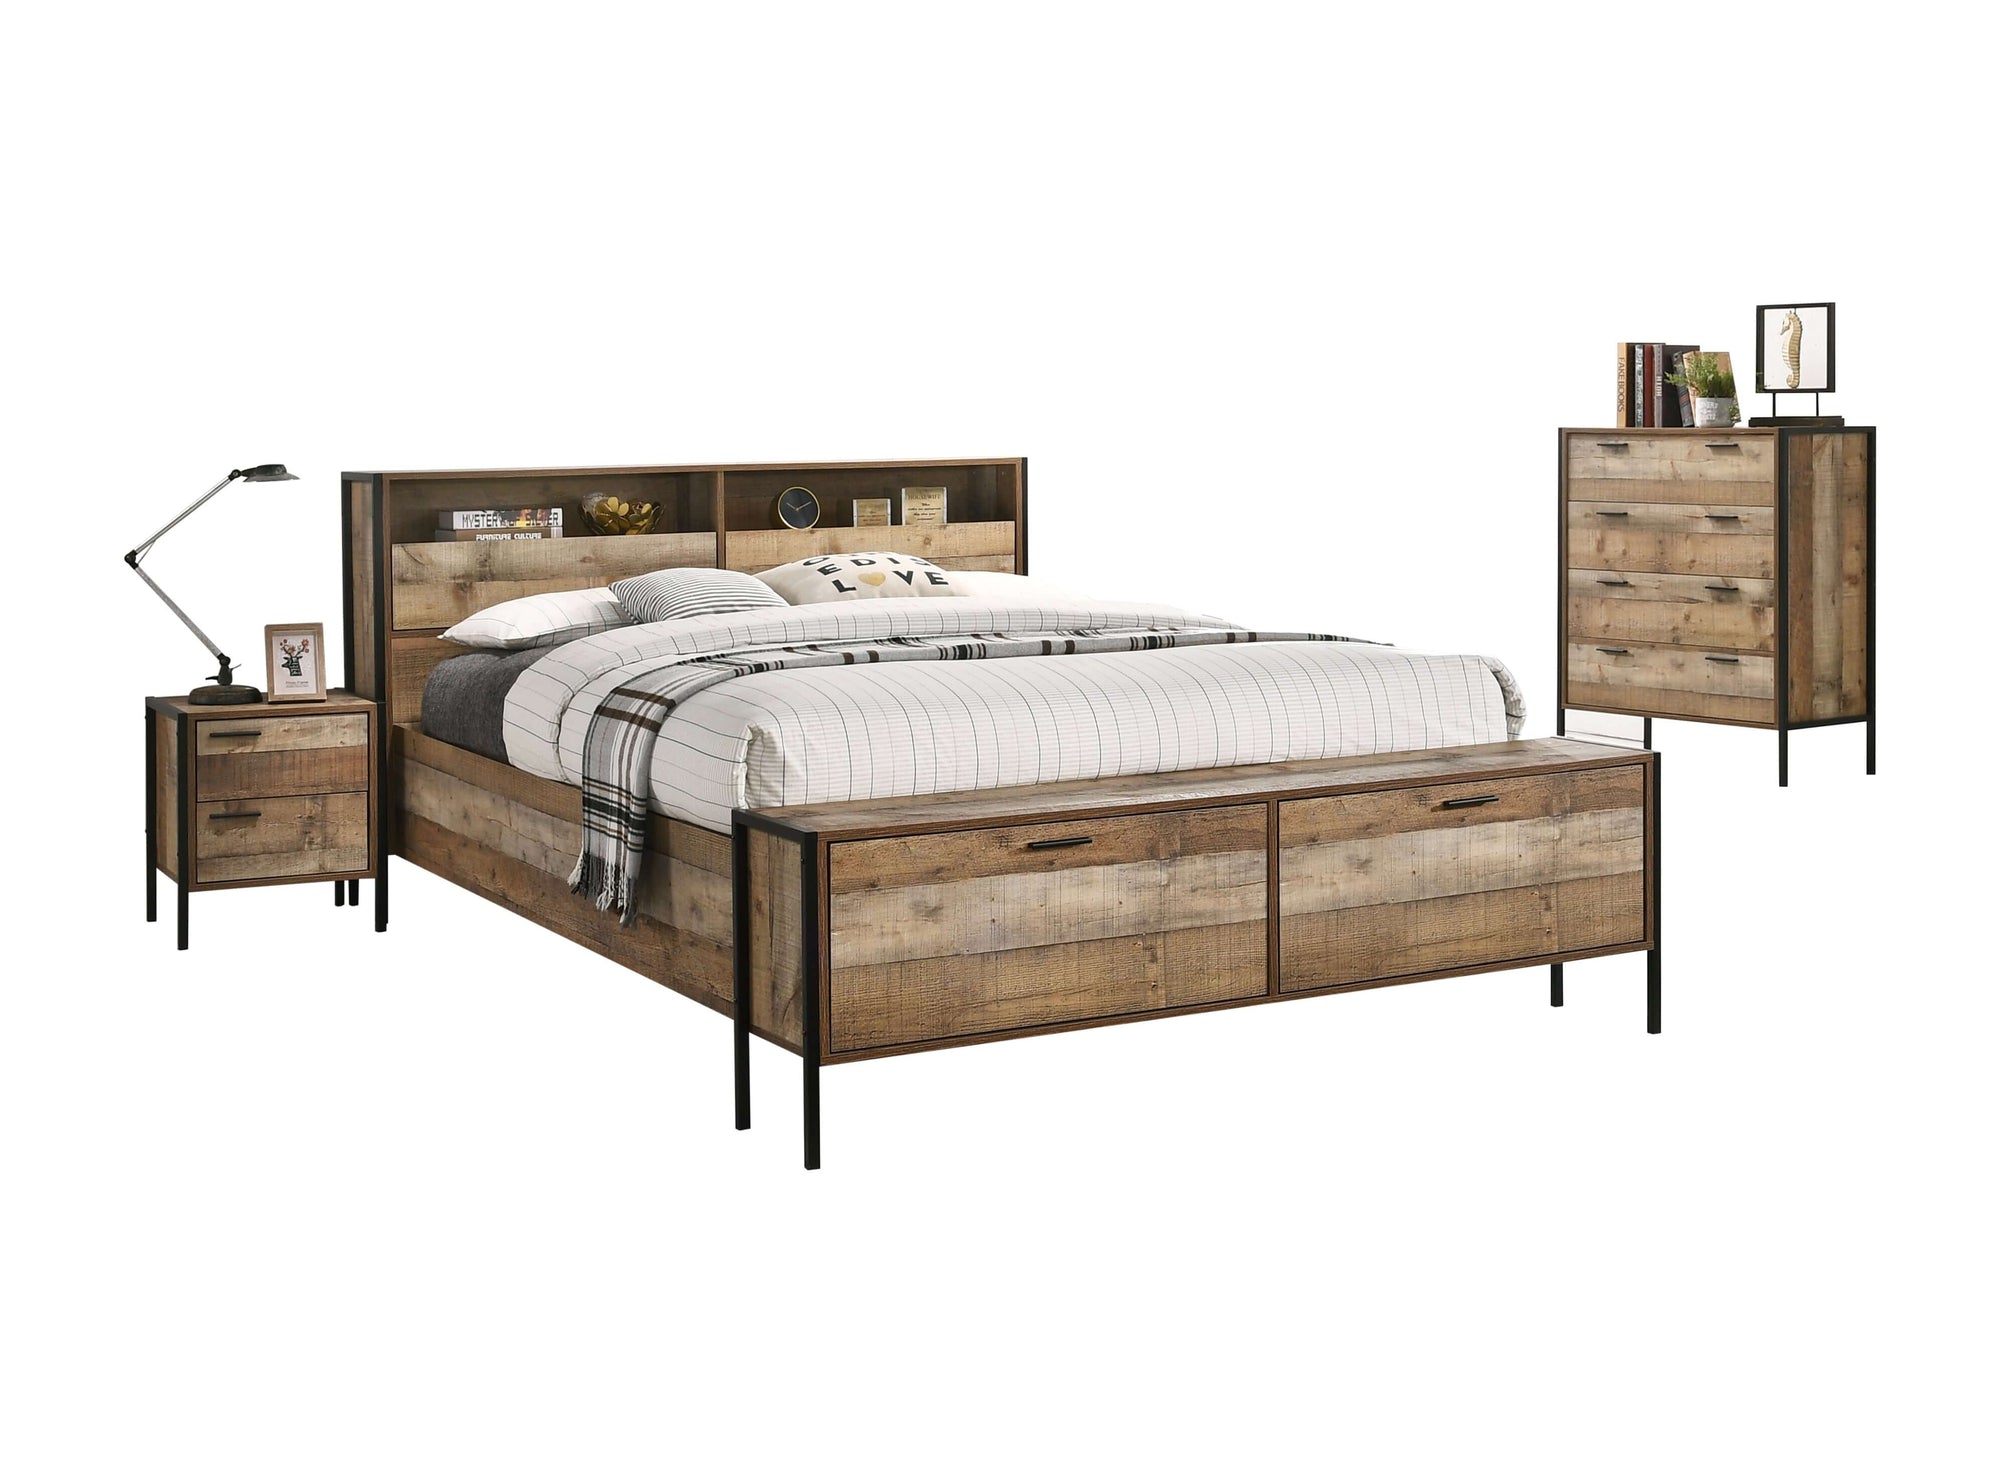 4 Pieces Storage Bedroom Suite with Particle Board Contraction and Metal Legs Queen Size Oak Colour Bed, Bedside Table & Tallboy-Upinteriors